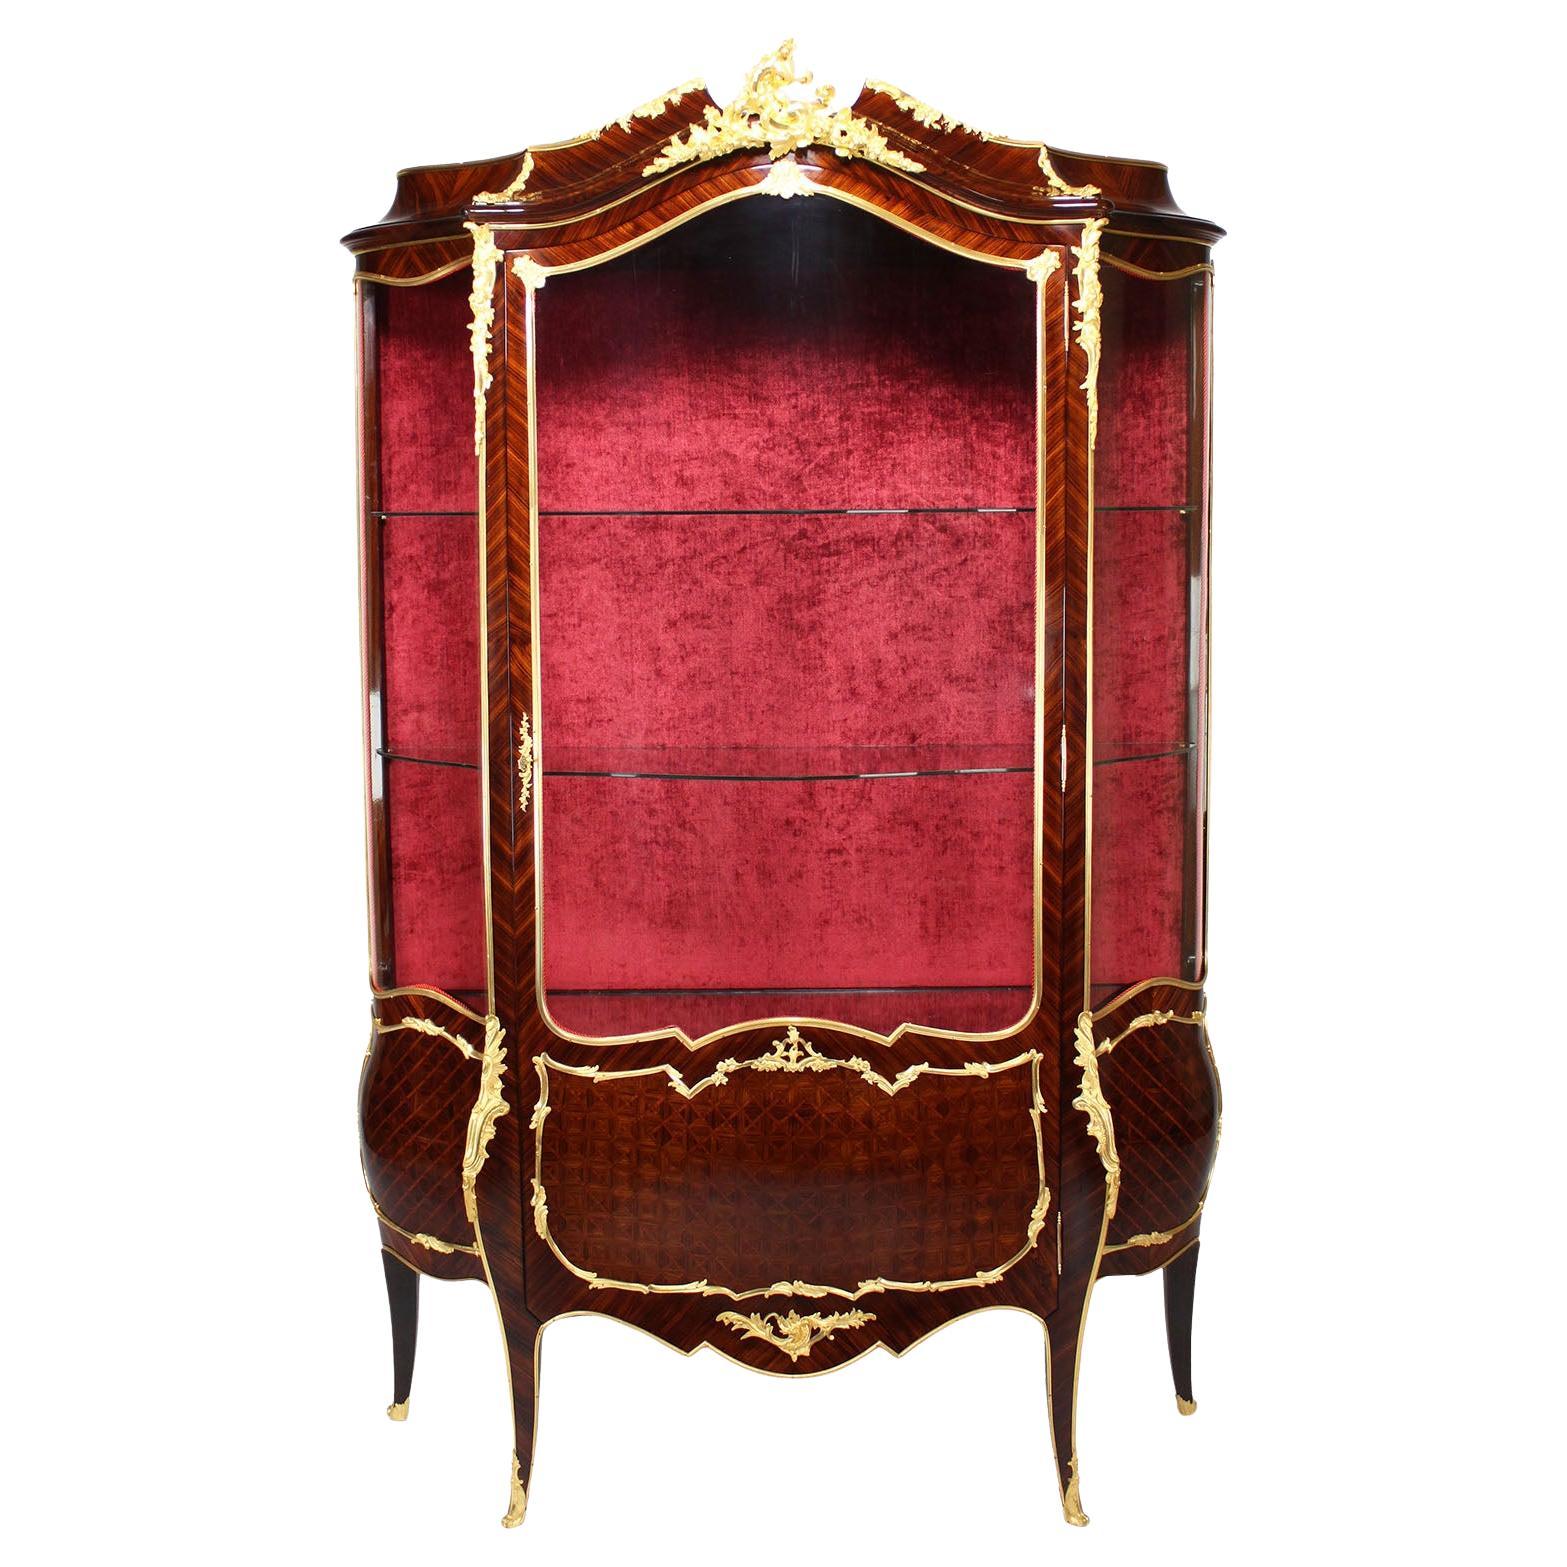 A French Louis XV Style Belle Époque Ormolu Mounted Vitrine, by Alexandre Hugnet